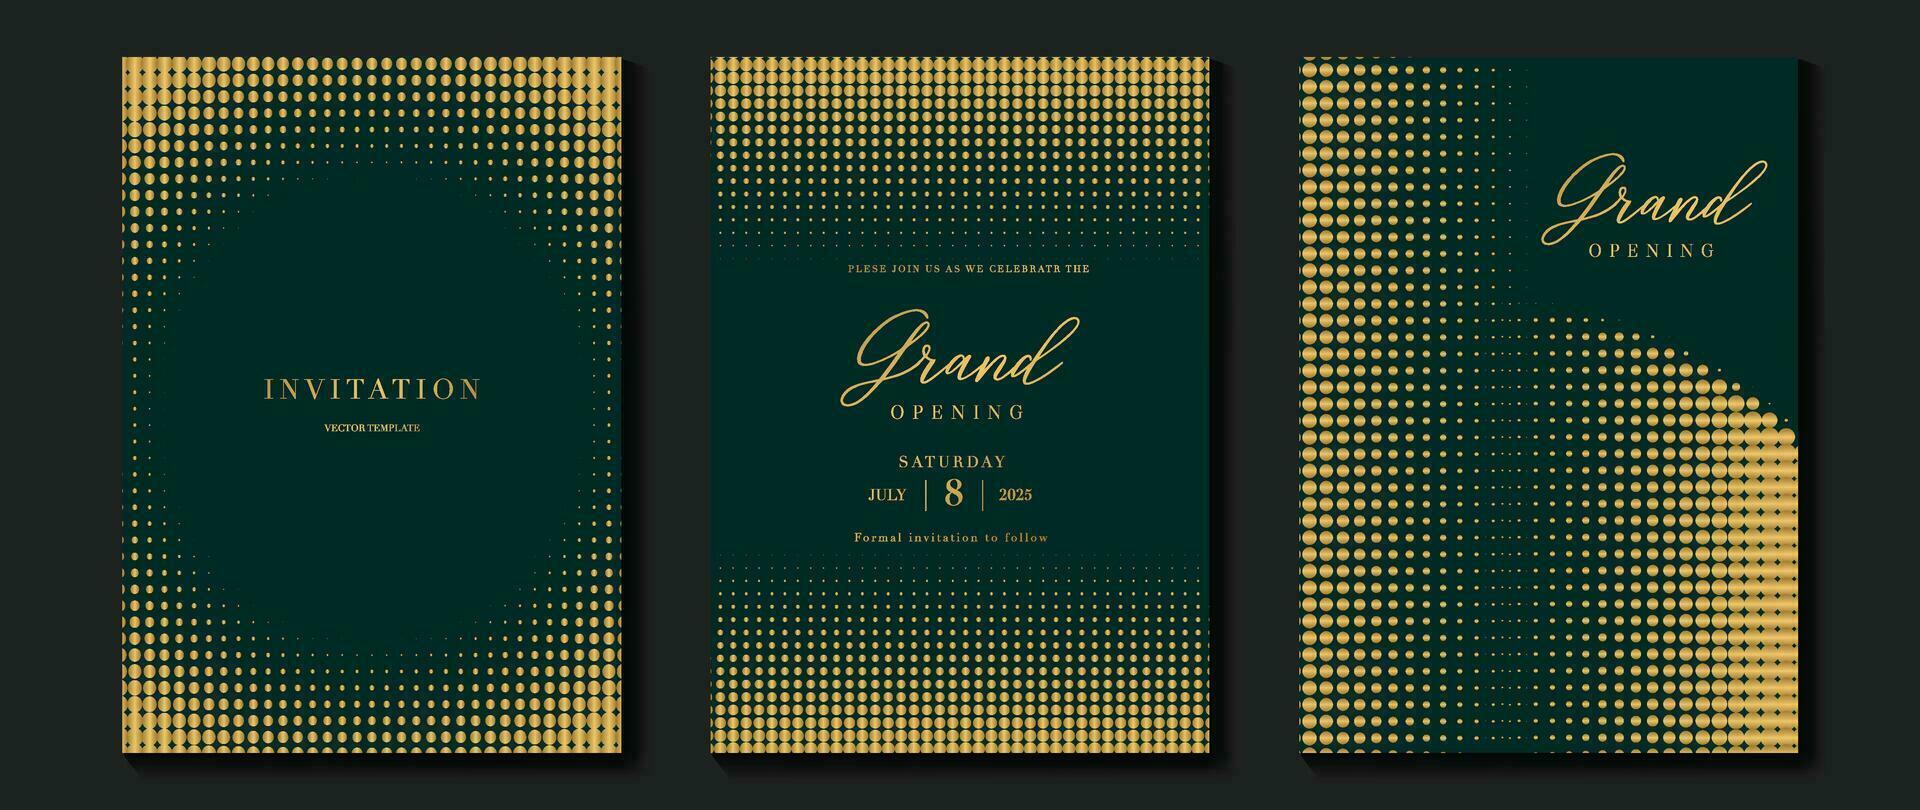 Luxury gala invitation card background vector. Golden elegant halftone gold pattern on dark green background. Premium design illustration for wedding and vip cover template, grand opening. vector